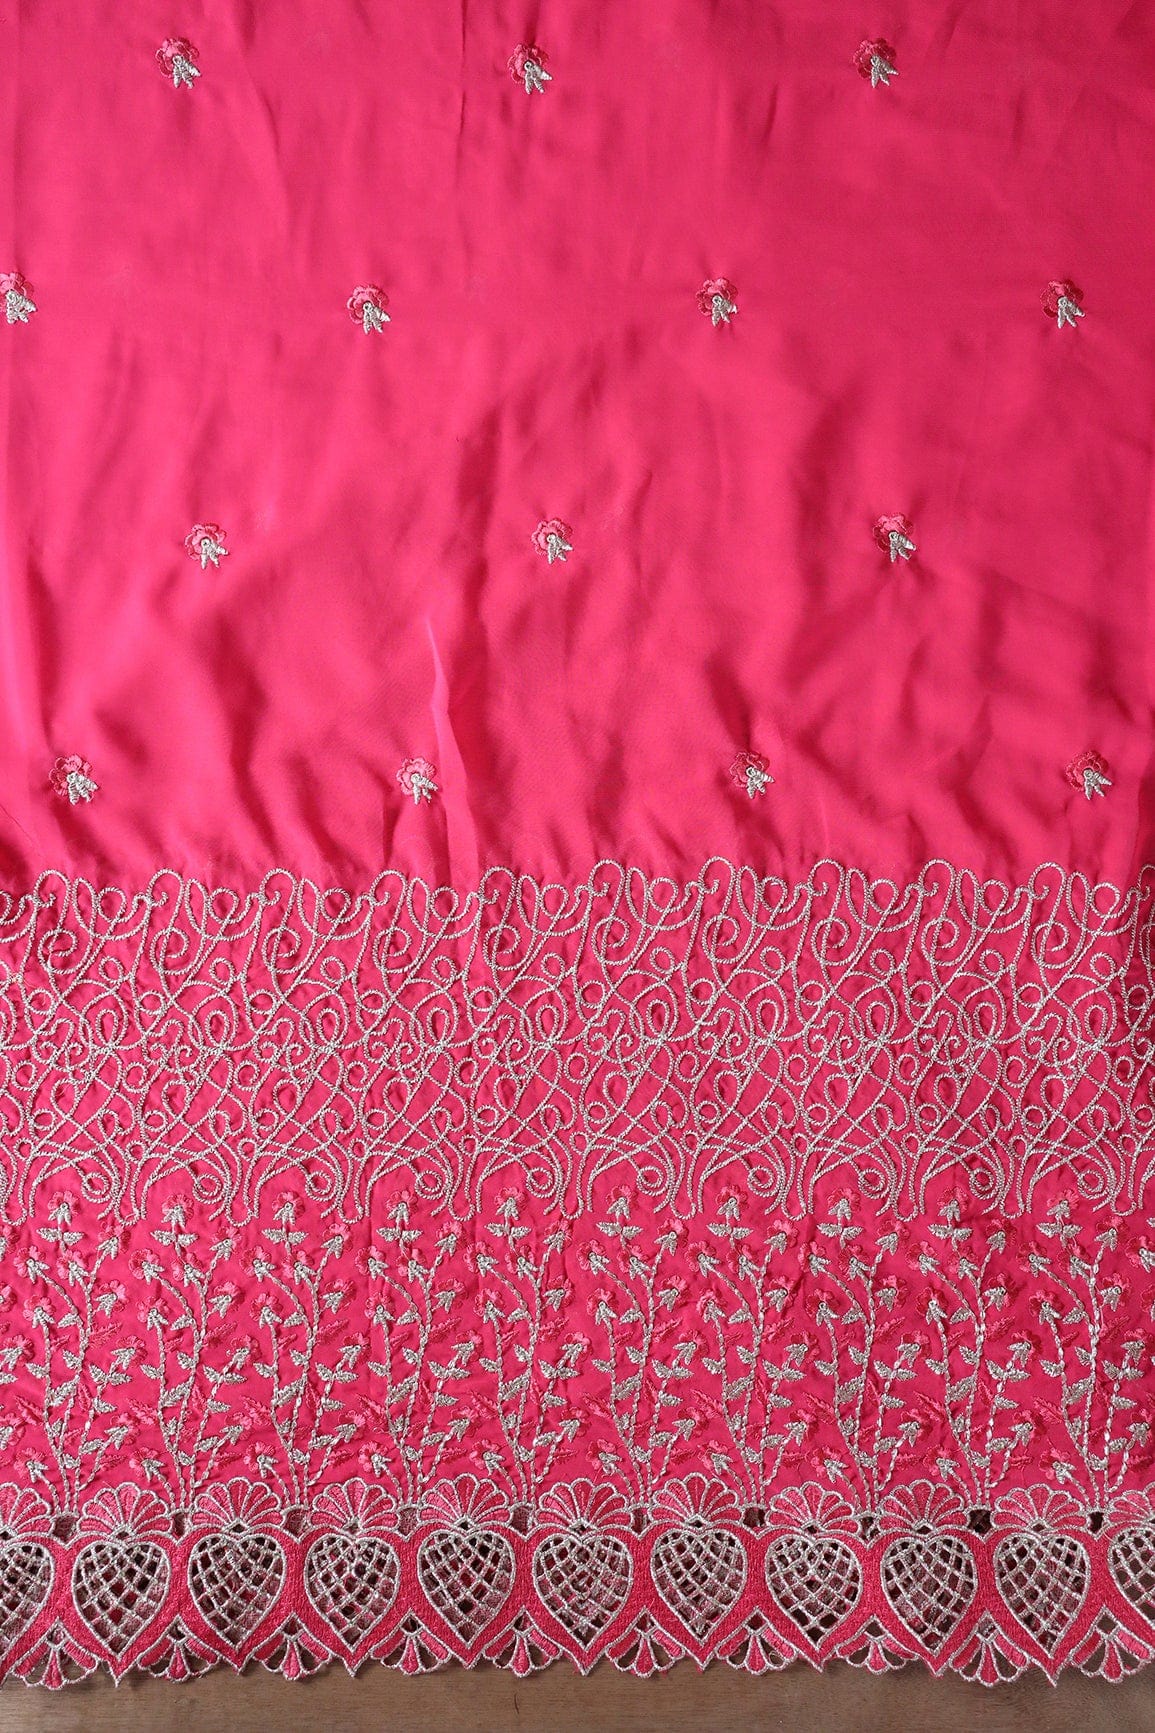 Big Width''56'' Pink Thread With Zari Floral Embroidery Work On Gajri Pink Georgette Fabric With Border - doeraa